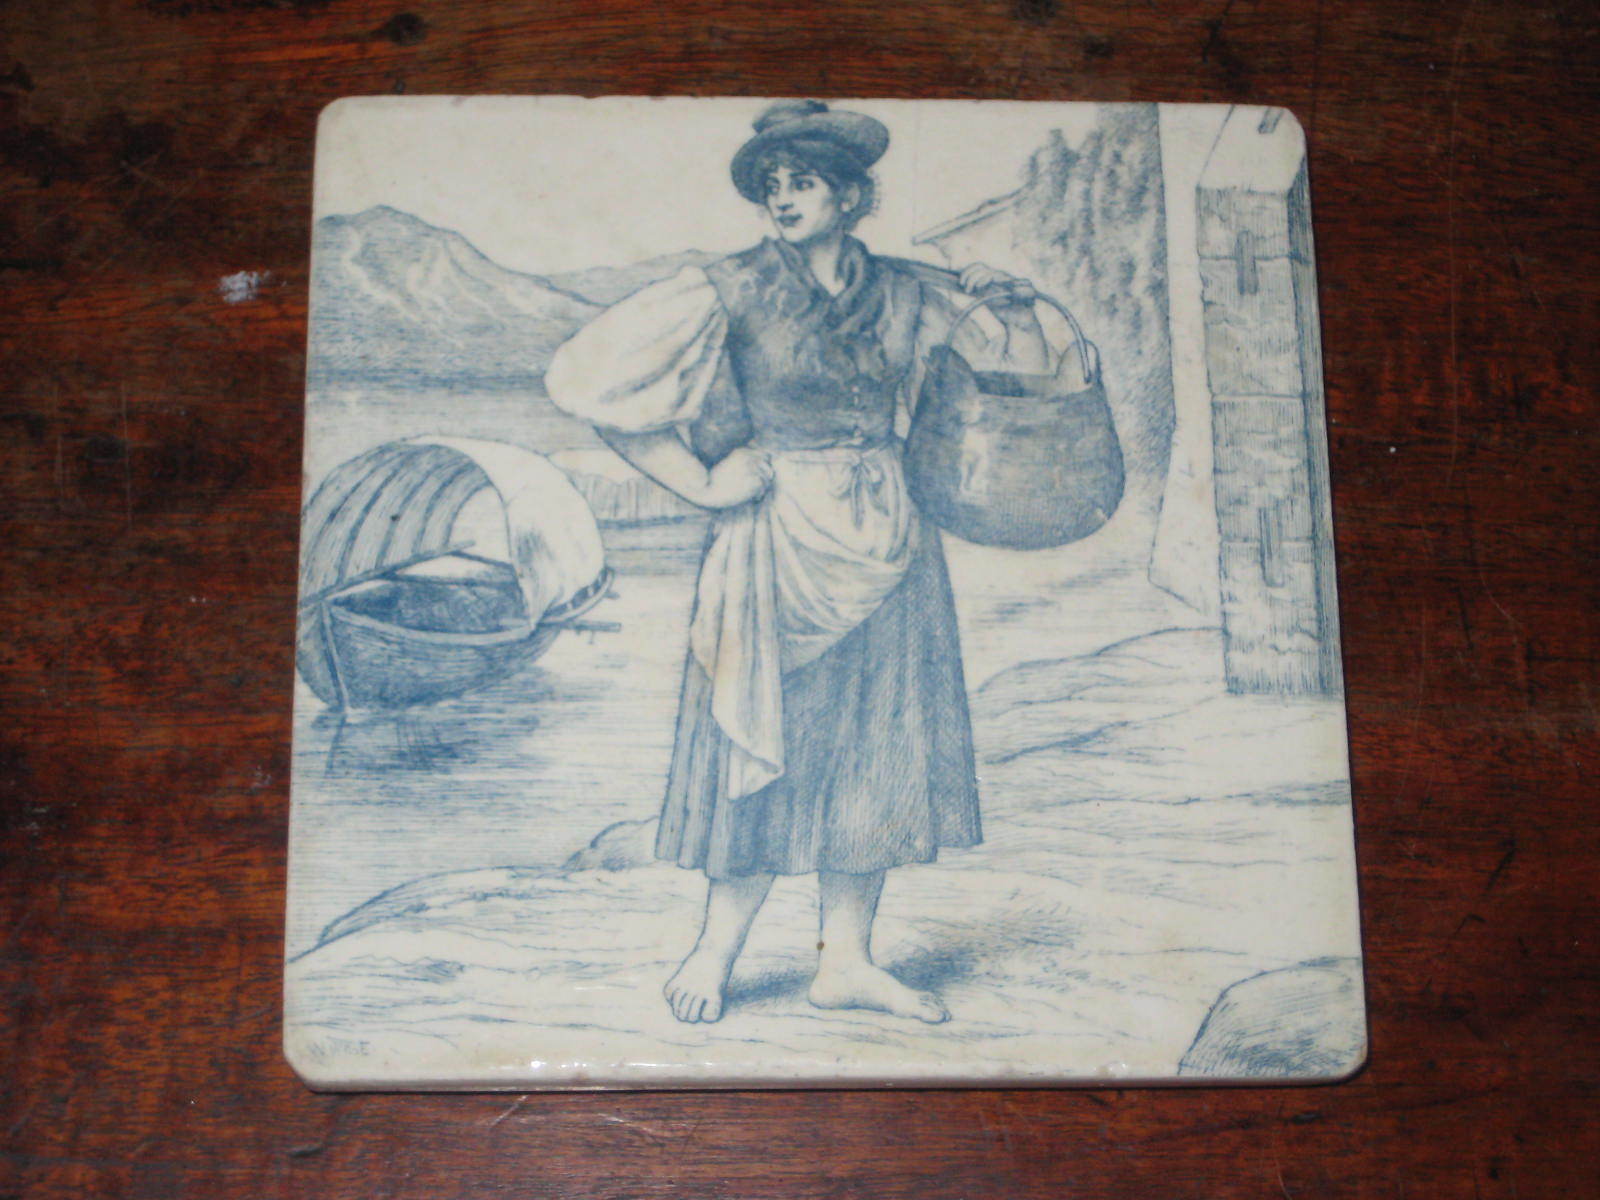 MINTON HOTPLATE TILE  WILLIAM WISE LADY BY LAKE 19TH CENTURY